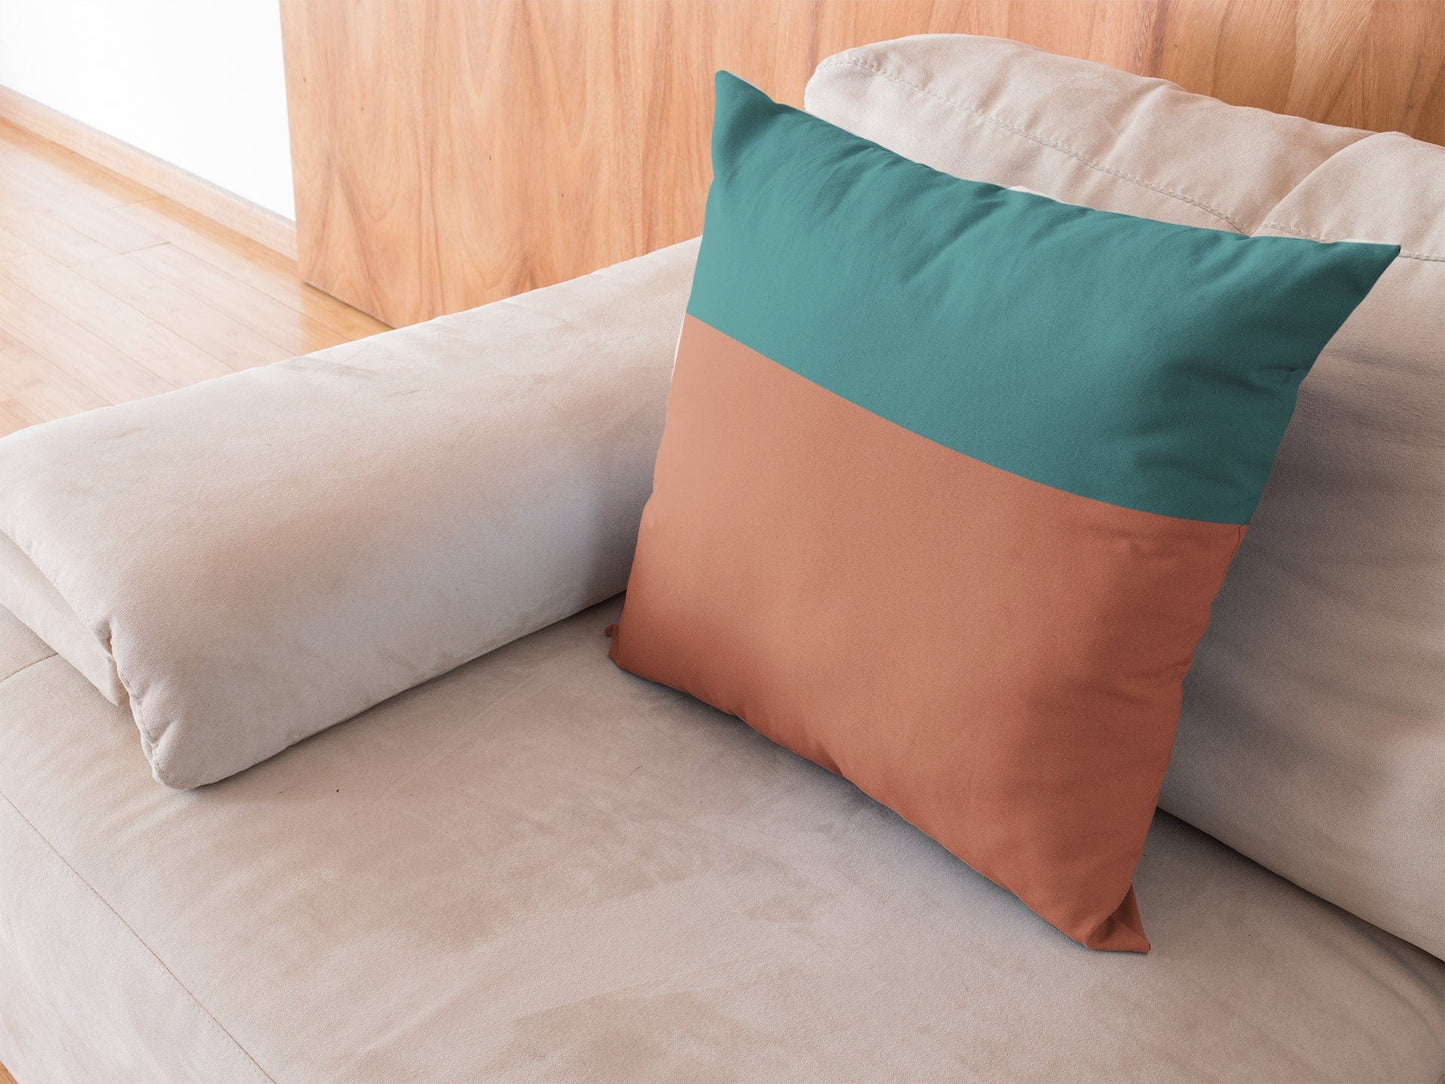 Teal Blue and Terracotta Pillow Cover